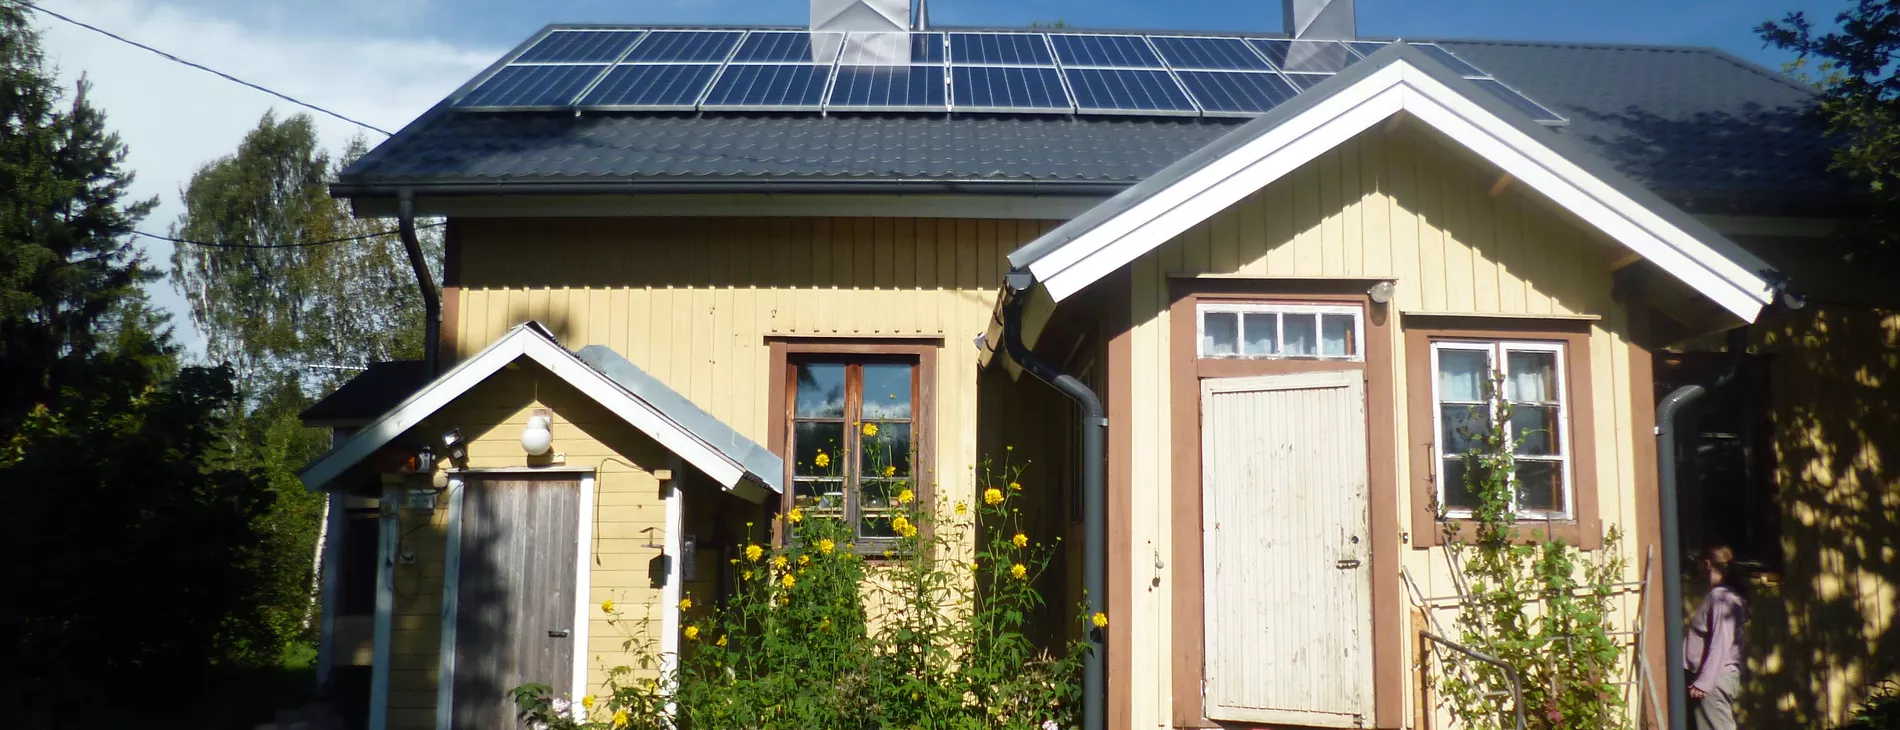 4.6KWP Photovoltaic system on a house in Finland